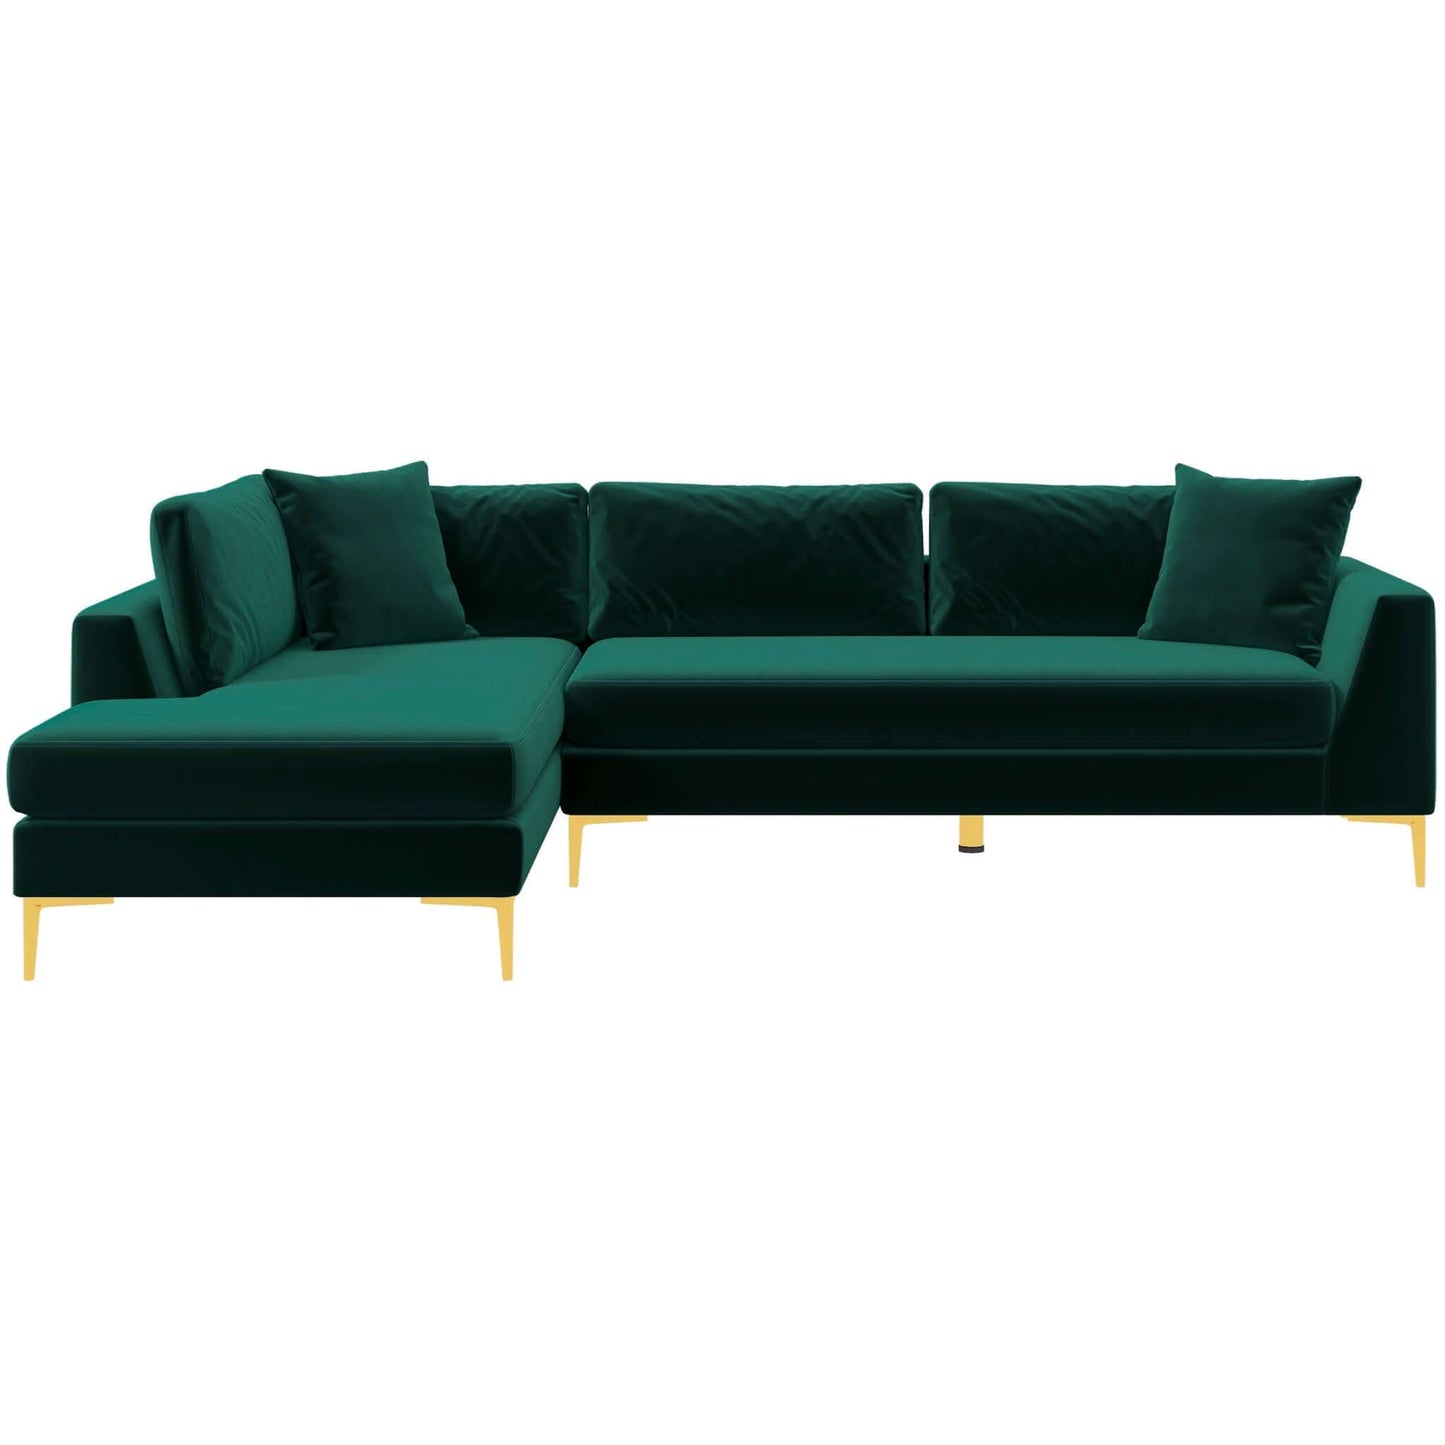 Ashcroft Furniture Co Sectional Sofas Left Sectional Mano Mid-Century Modern L-Shaped Velvet Sectional Sofa in Green